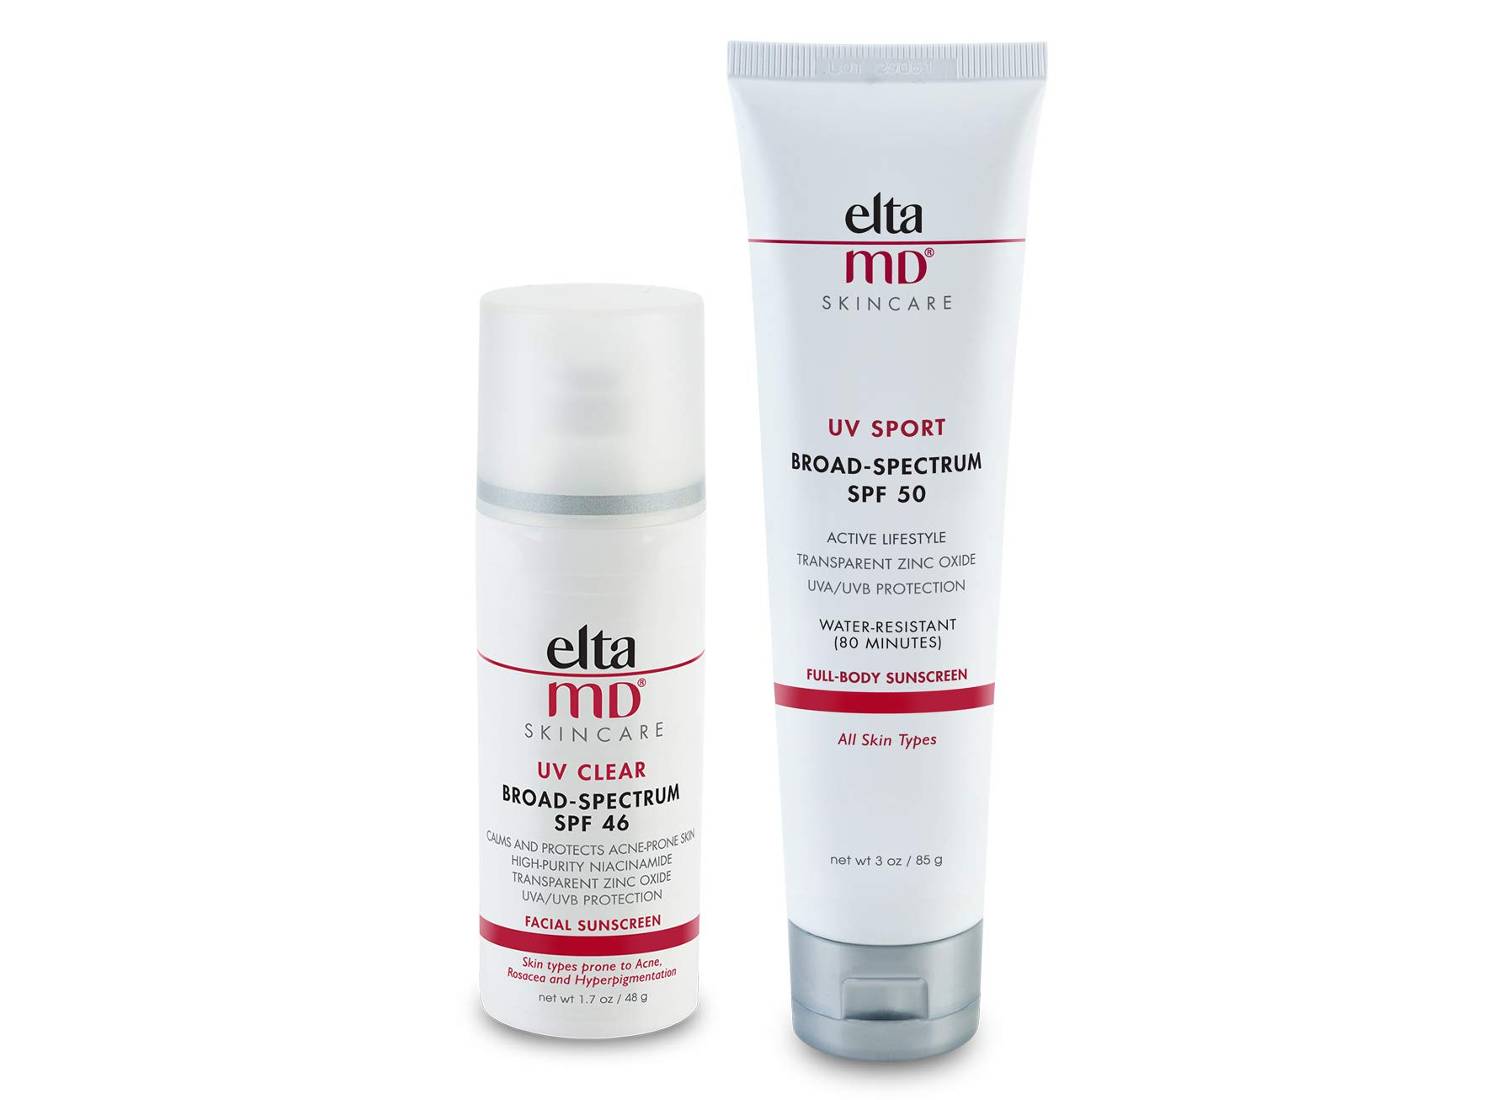 EltaMd face and body sunscreen bundle.